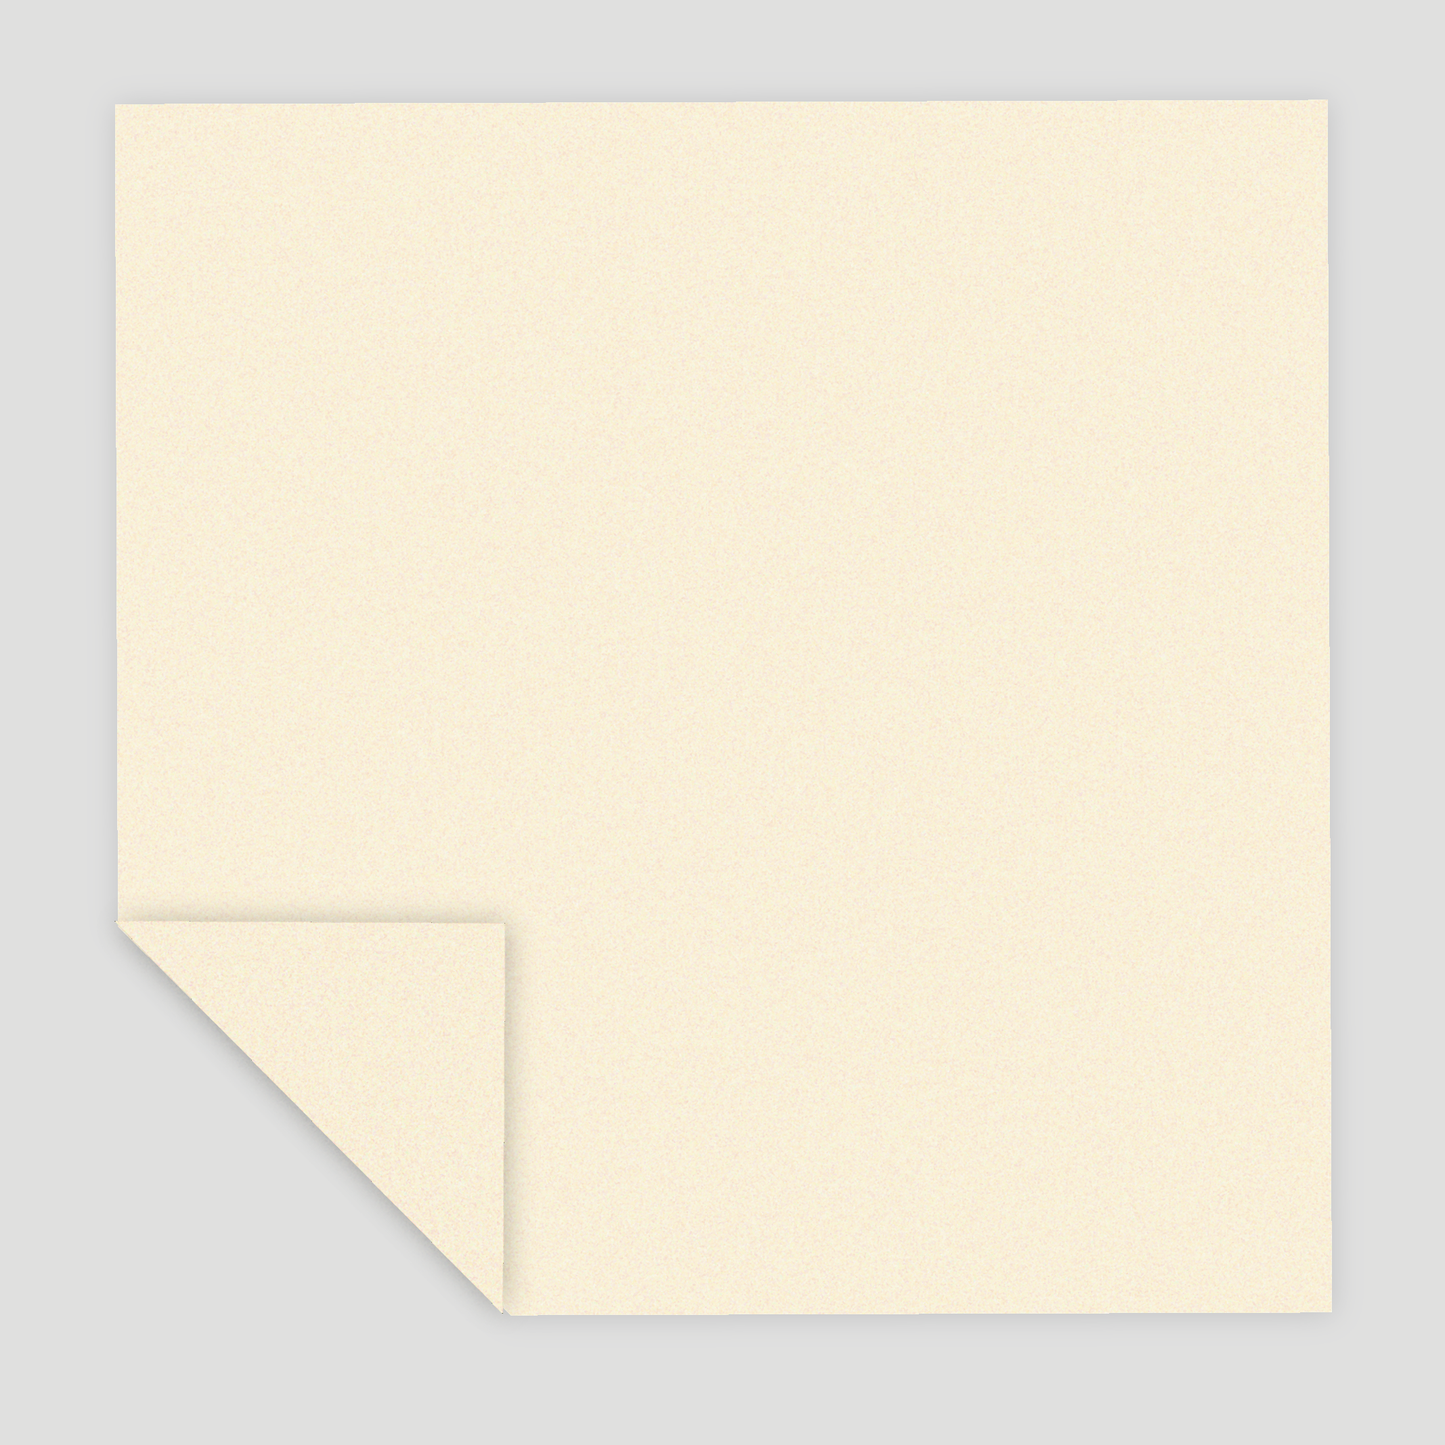 [Taro's Origami Studio] Biotope Jumbo 13.75 Inch / 35cm Single Color (Natural White) 10 Sheets (All Same Color) Premium Japanese Paper for Advanced Folders (Made in Japan)